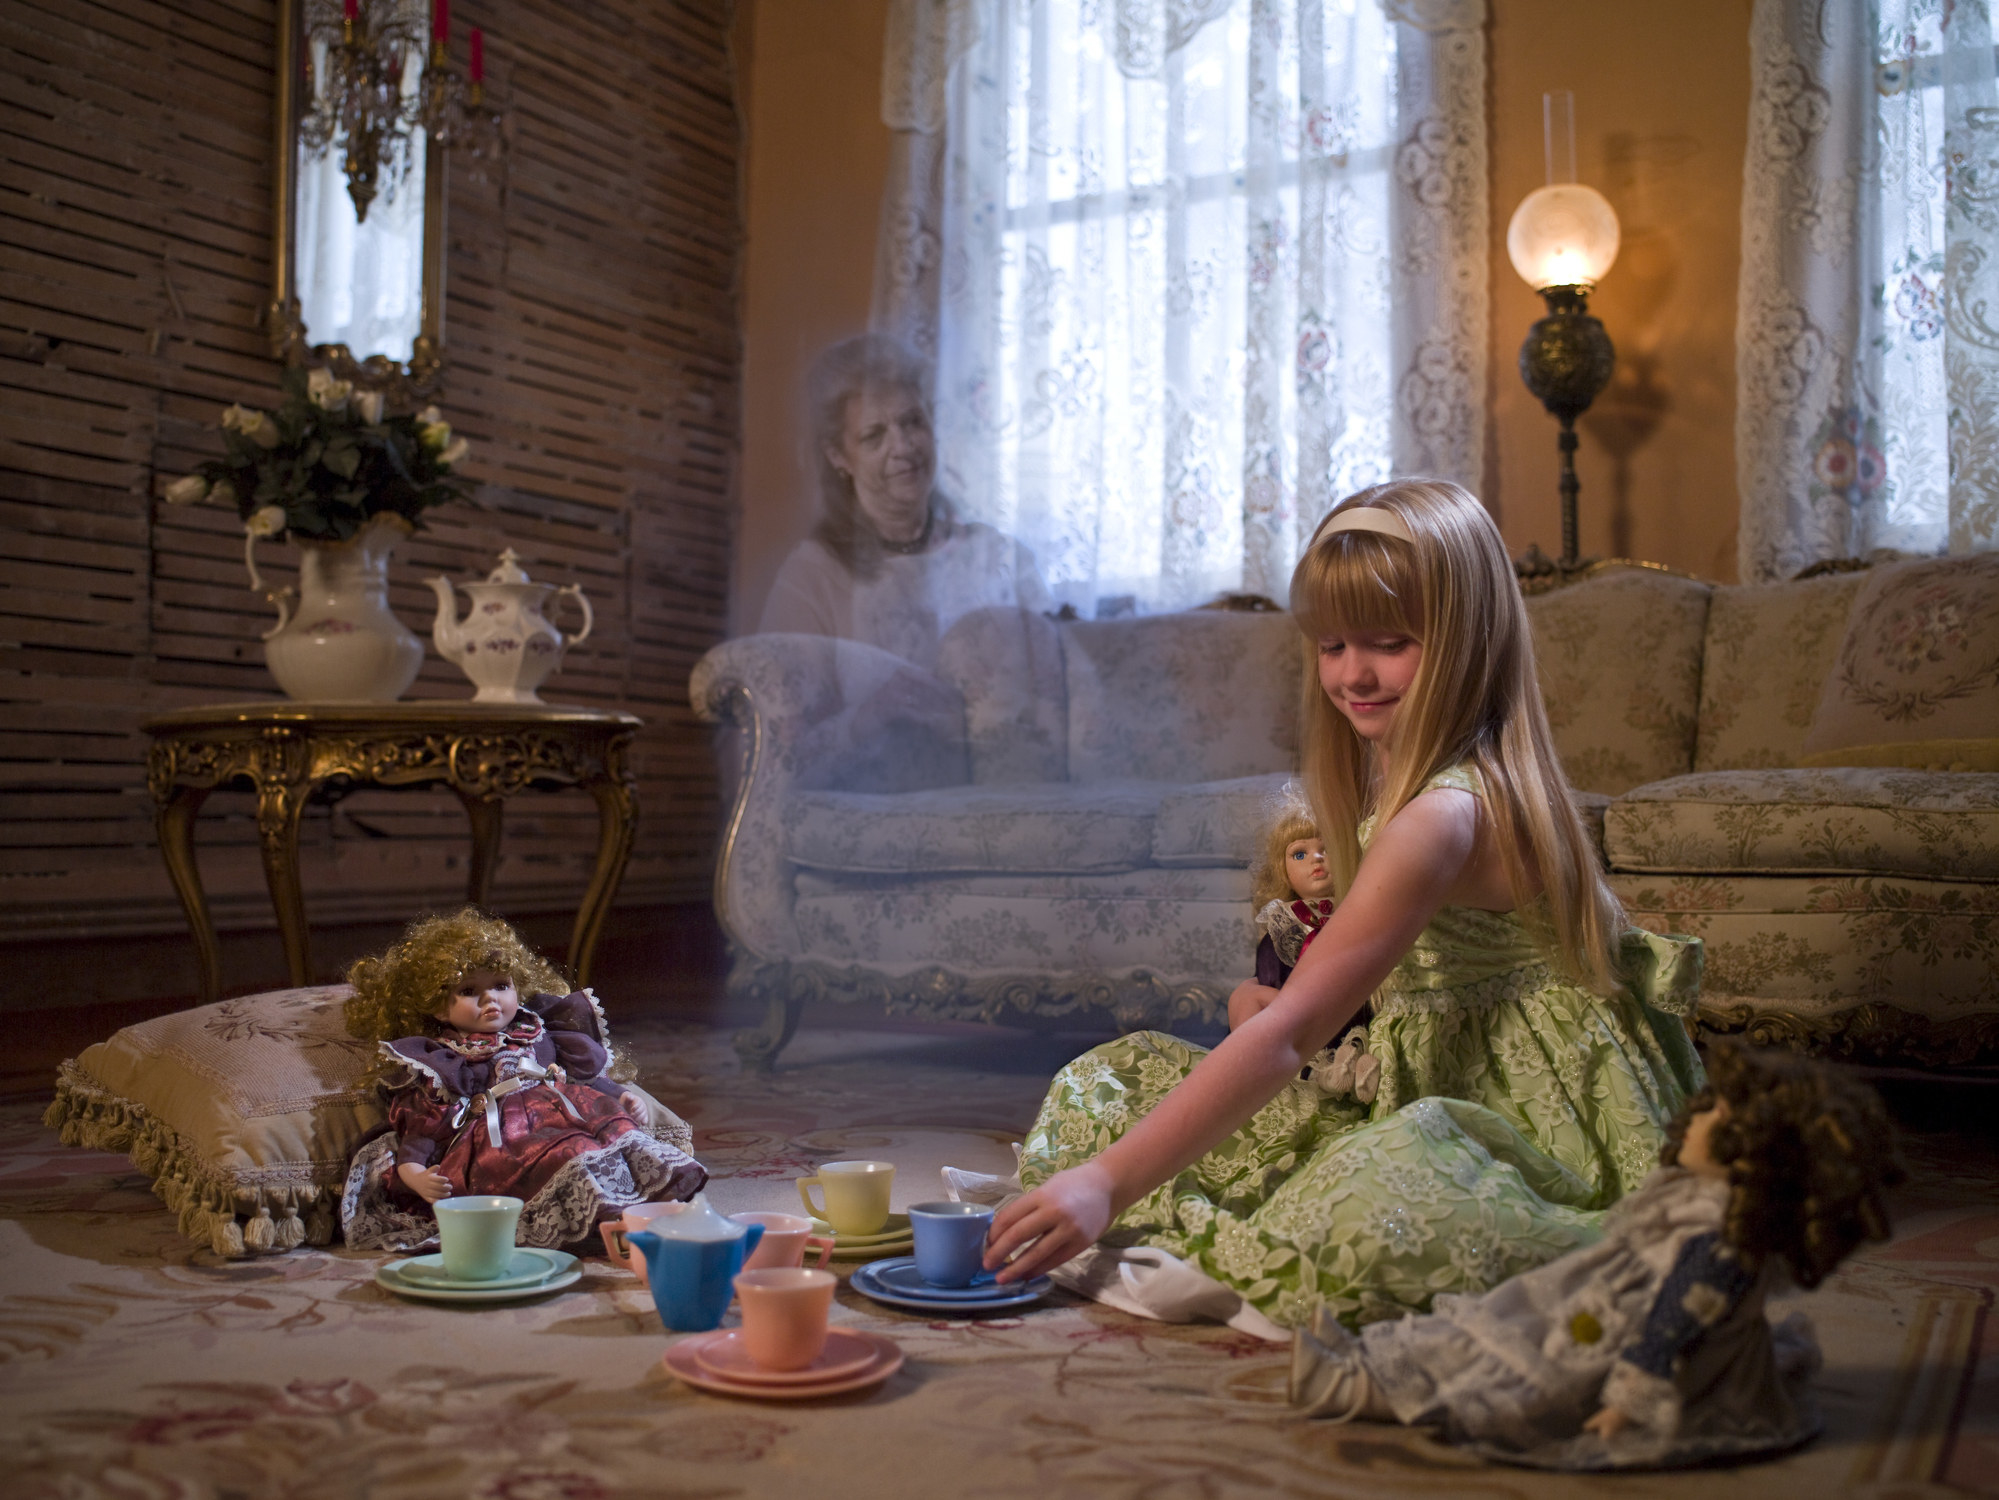 A ghost in the background as a little girl plays with a tea party set